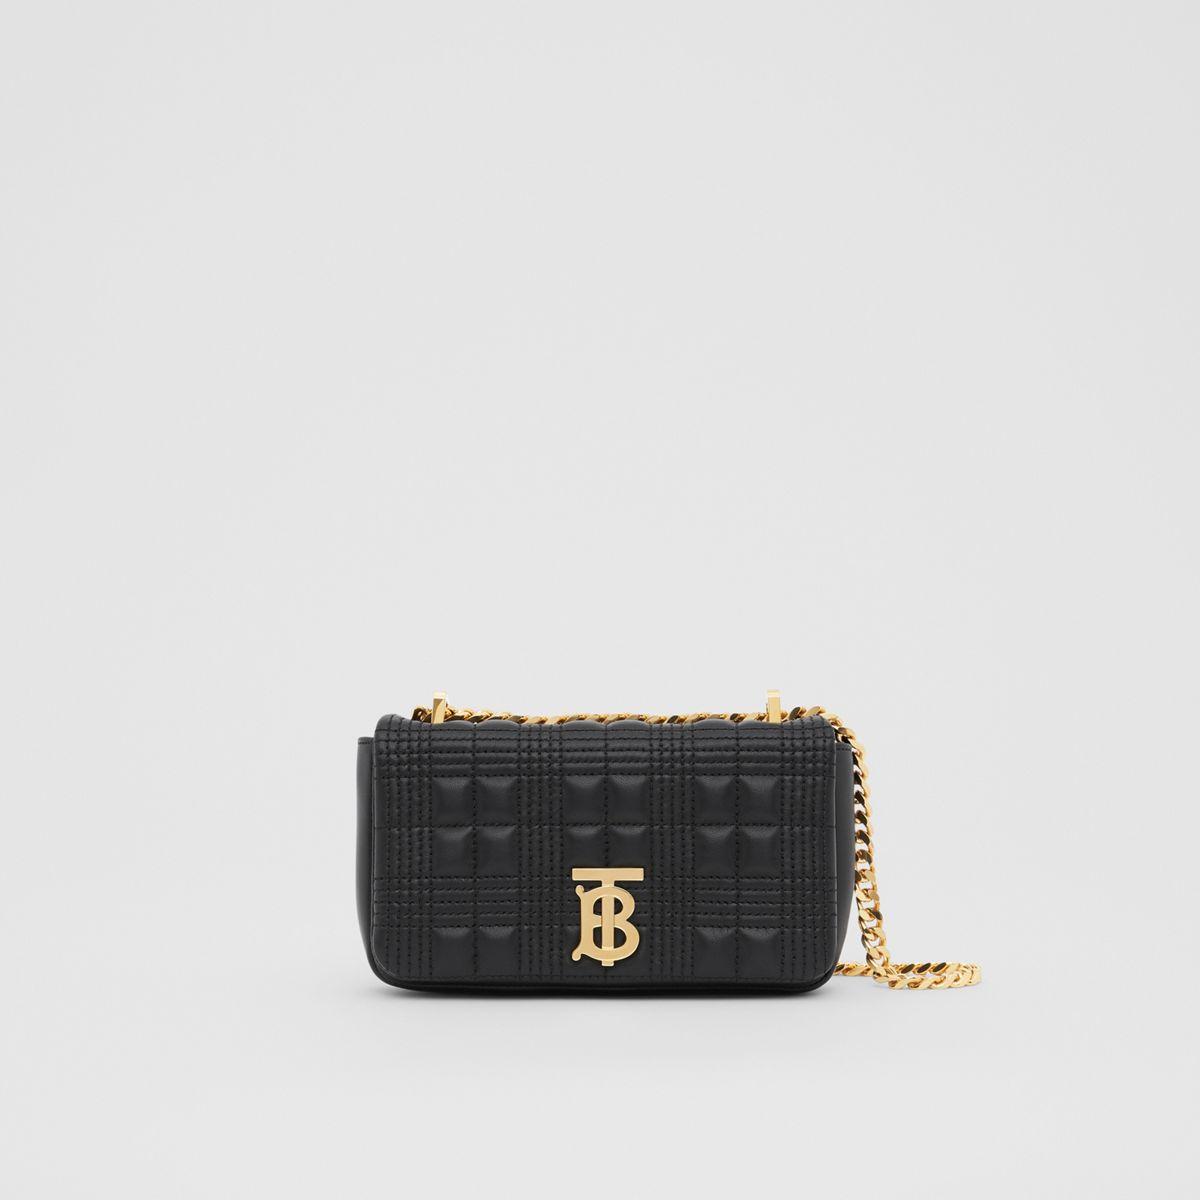 Burberry Quilted Leather Mini Lola Bag in Black